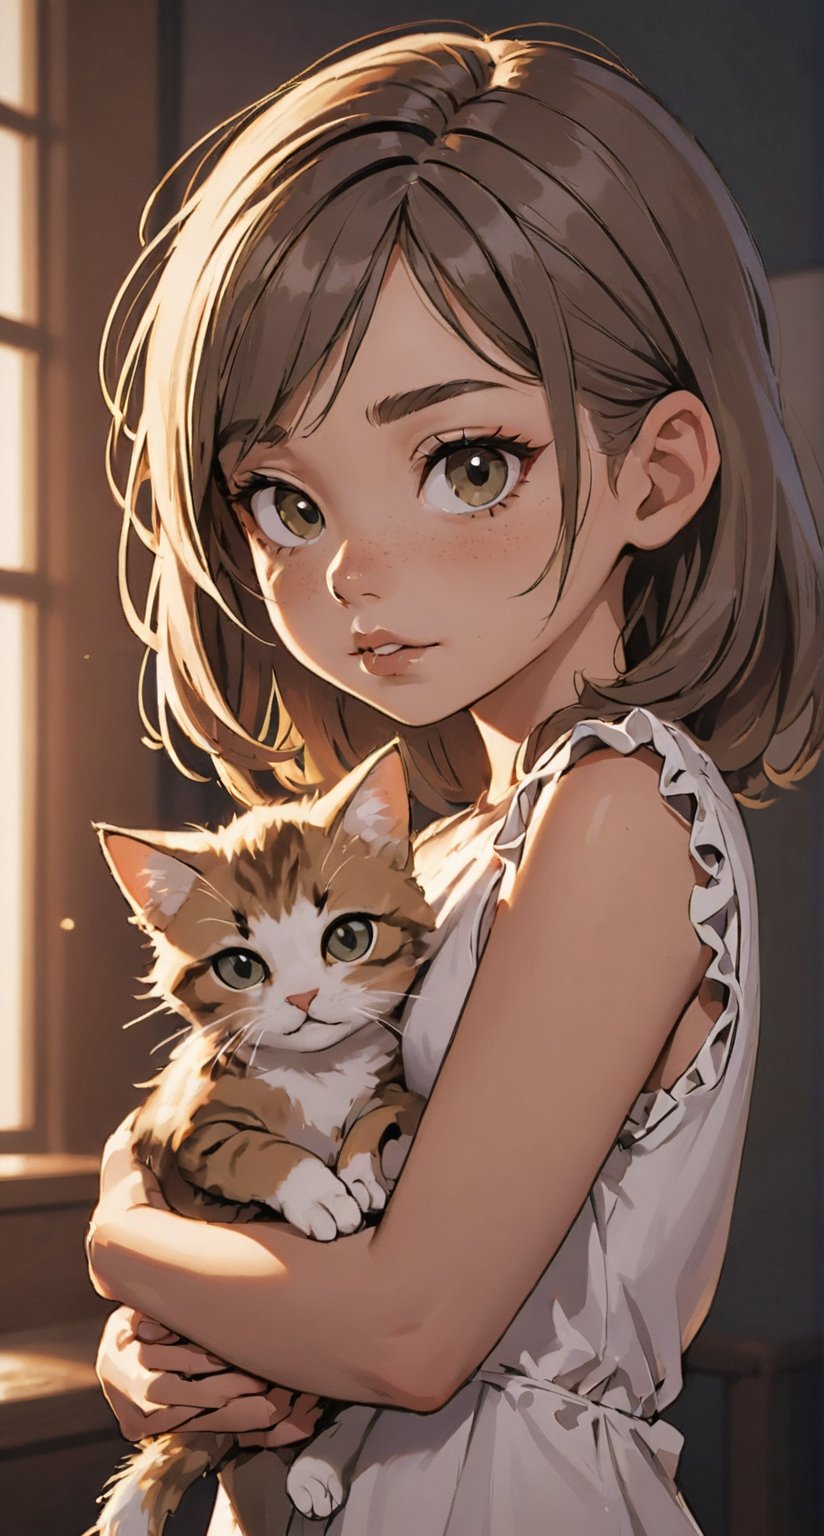 A stunning oil painting of a glamorous portrait of a little girl cradling a kitten in her arms. The image is bathed in cinematic lighting that creates a warm and evocative glow on the scene. The depth of field is beautifully crafted, drawing attention to the tender moment between the child and her beloved pet. The artwork captures an intriguing combination of hyperrealistic detail, precise architectural lighting, plastic and neon-like materials. Additionally, there are precisely anatomical elements which give a sense of realism to the image. The whole piece is masterfully crafted with great attention paid to every detail in order to create a truly stunning visual experience,1girl